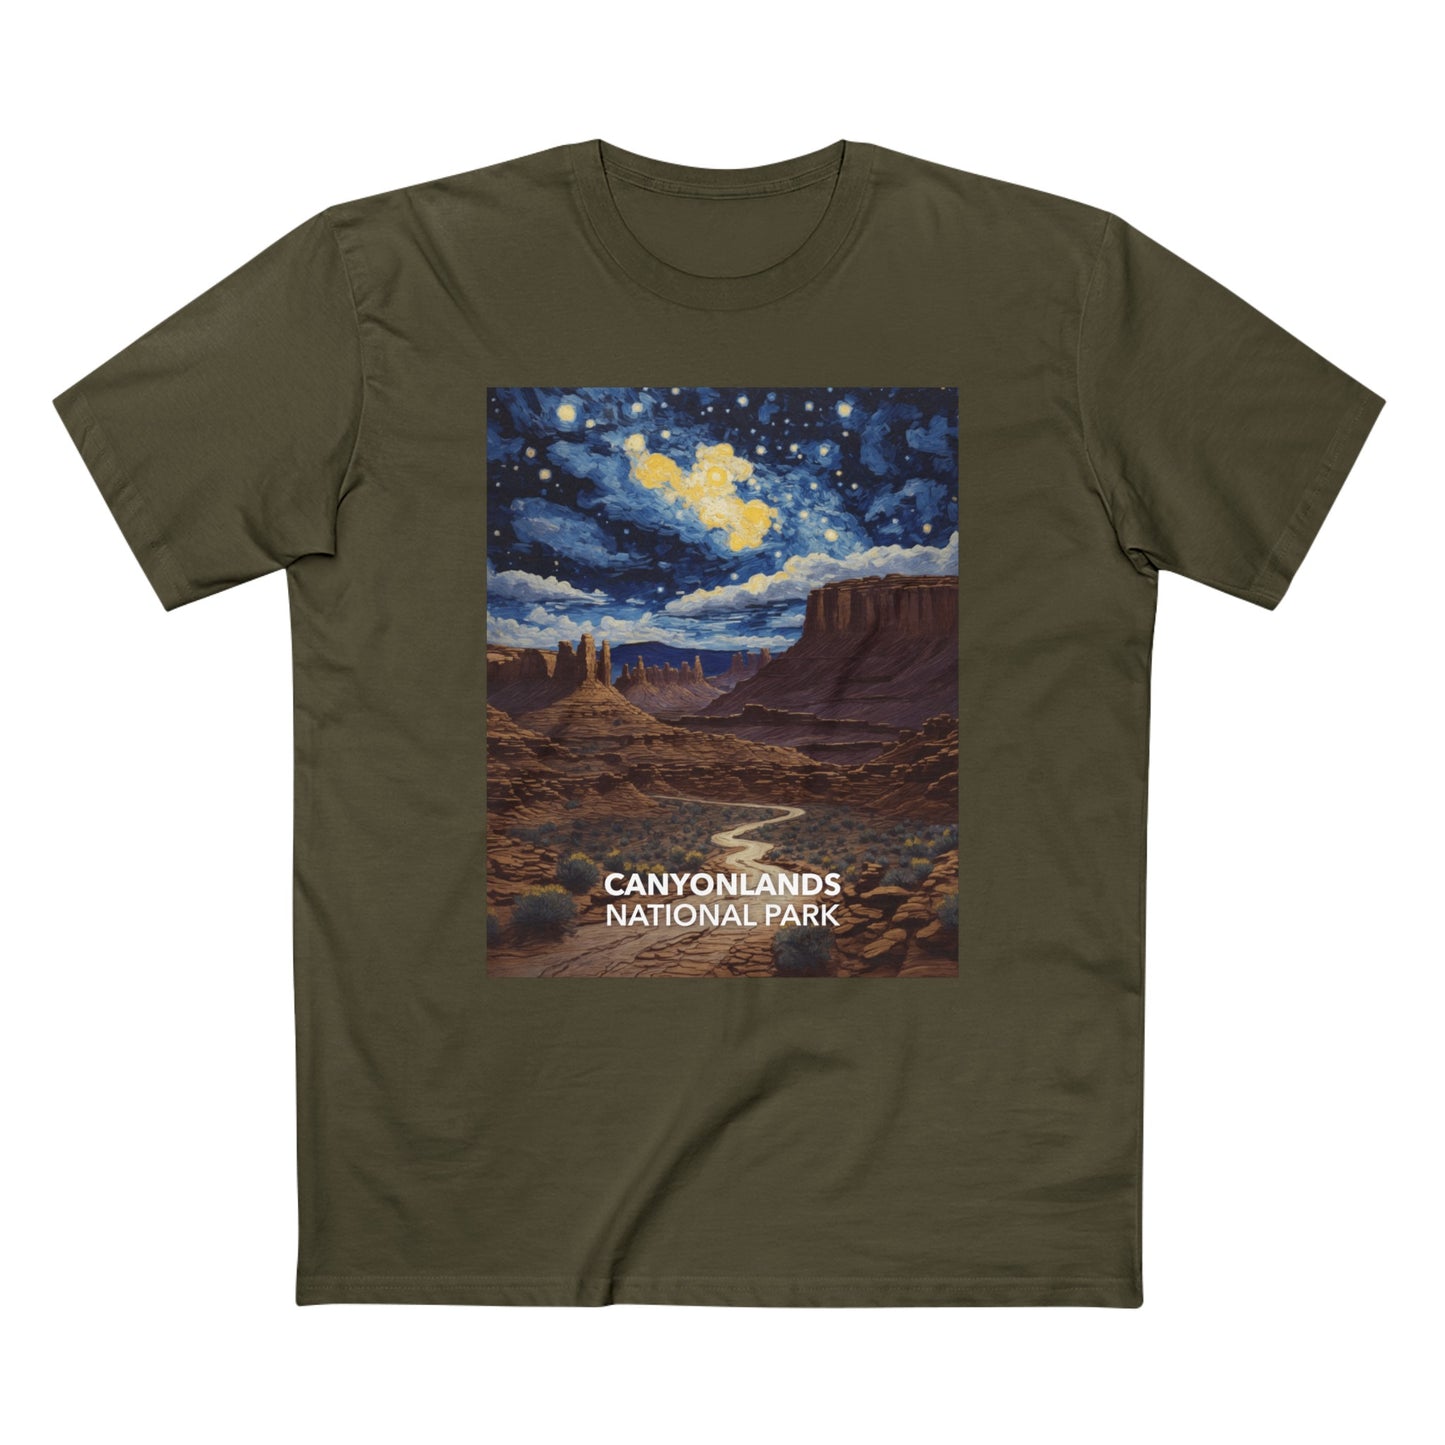 Canyonlands National Park T-Shirt - The Starry Night